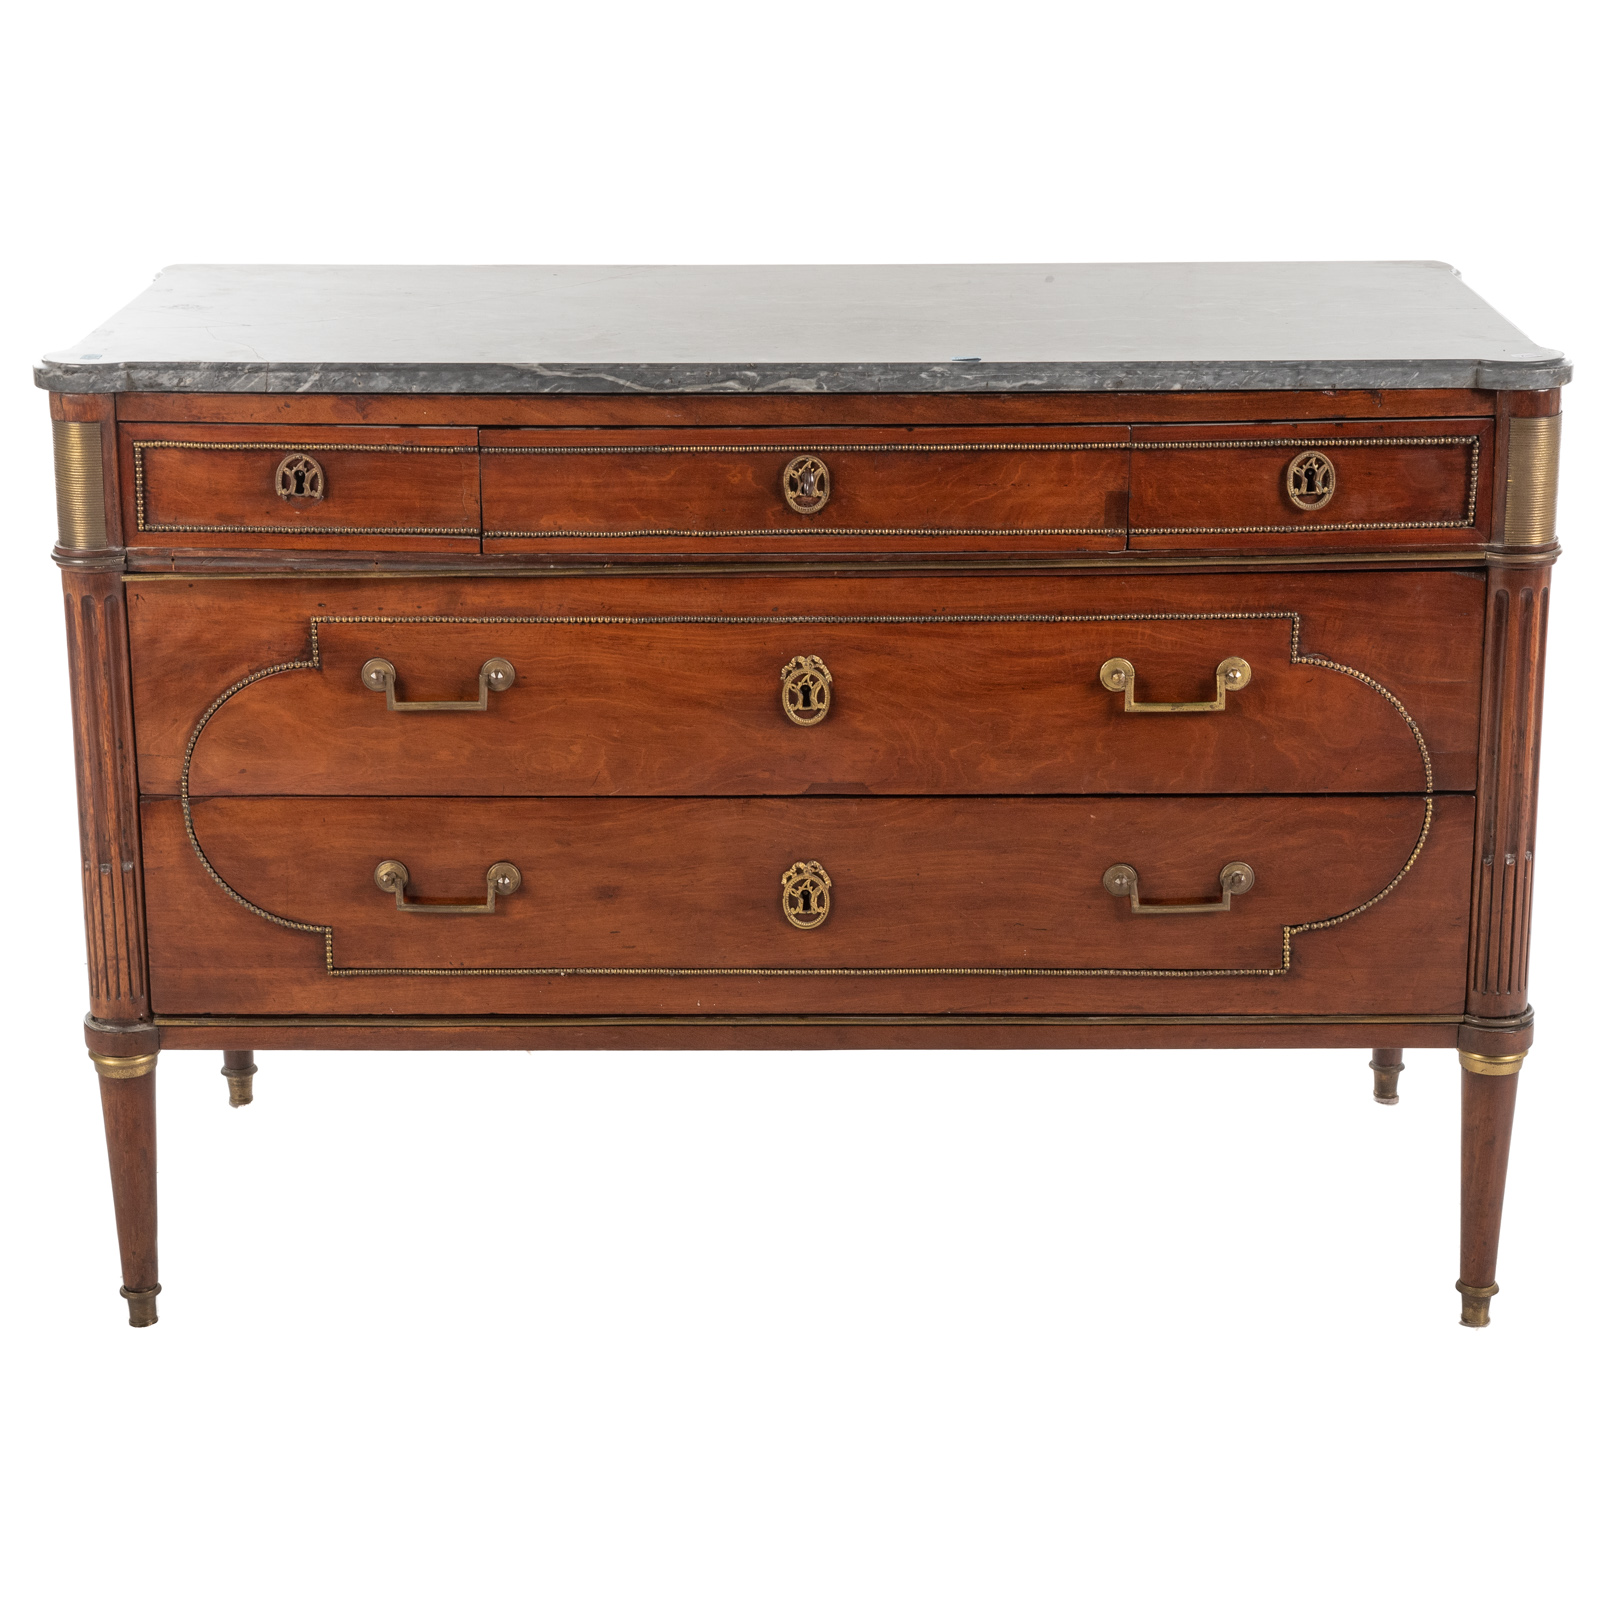 LOUIS XVI STYLE MARBLE TOP CHEST 2ea0ad